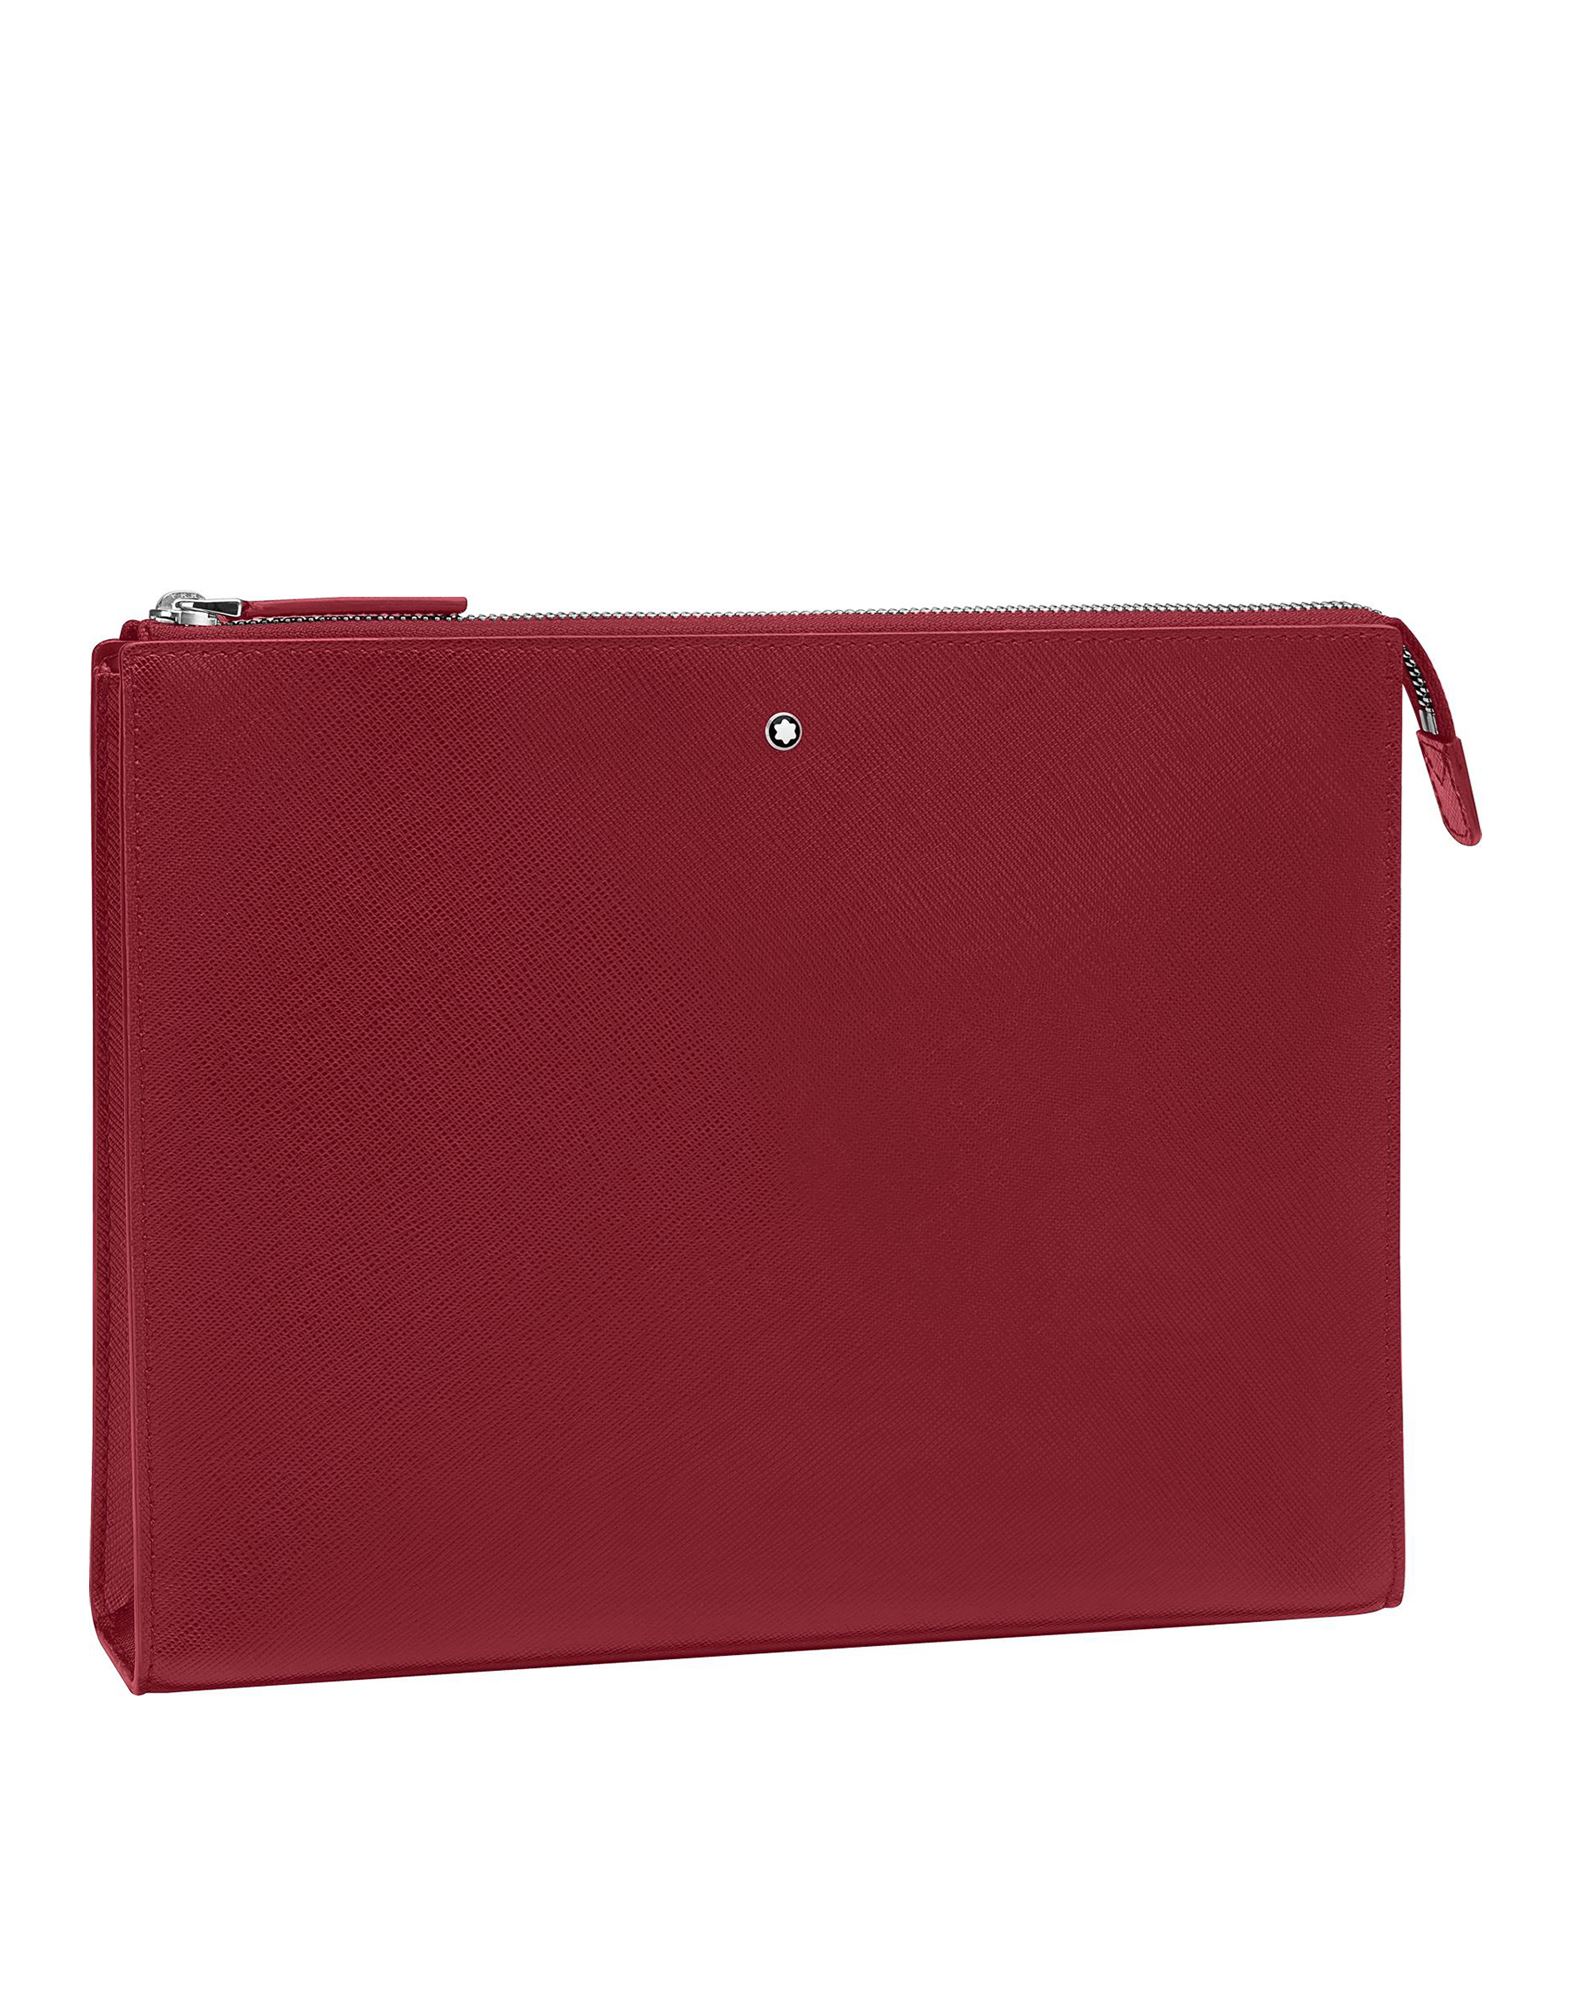 Montblanc Handbags In Red